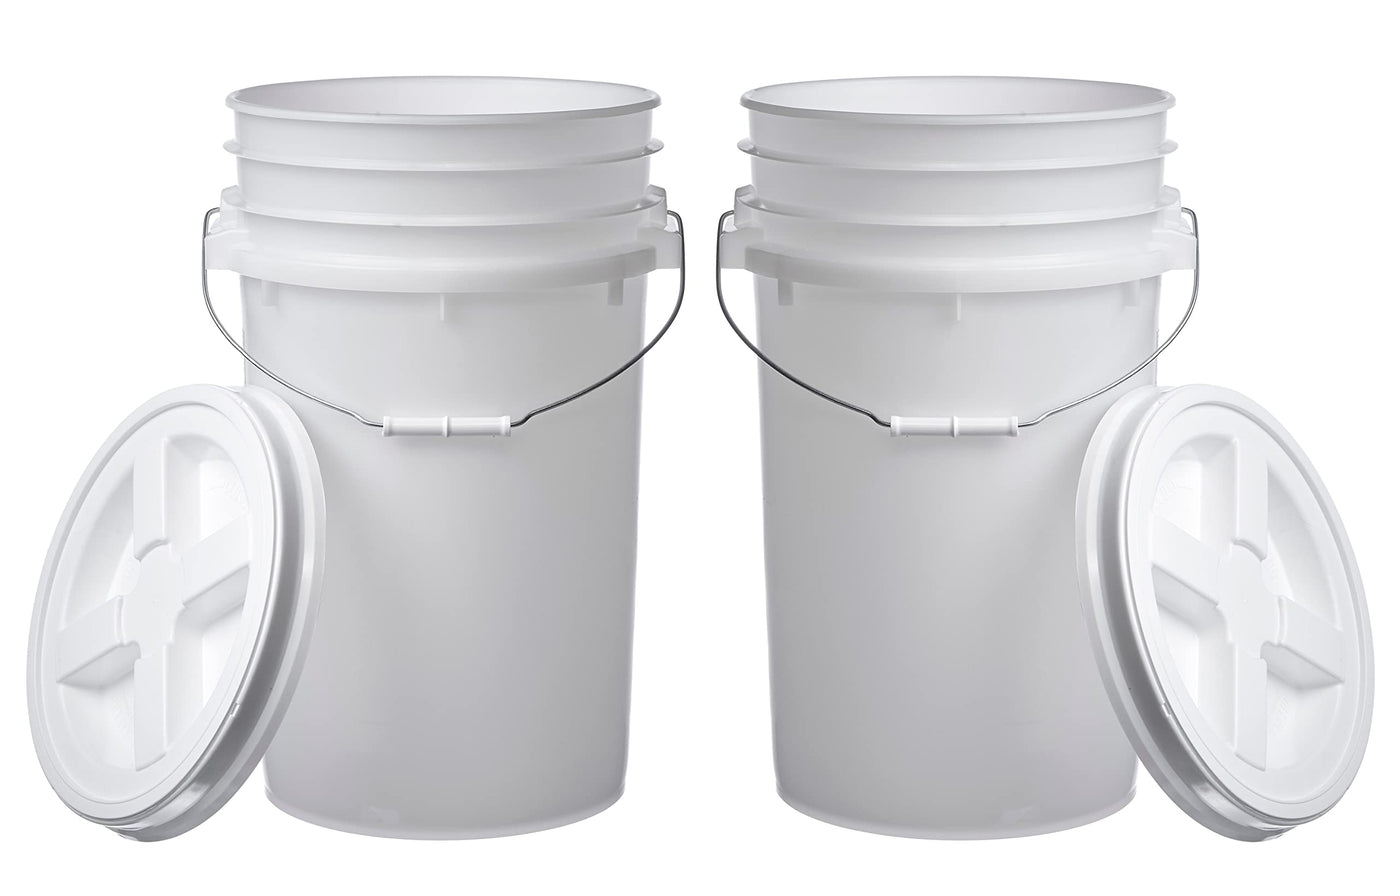 7 Gallon (2 Pack) Bucket With Gamma Seal Lid